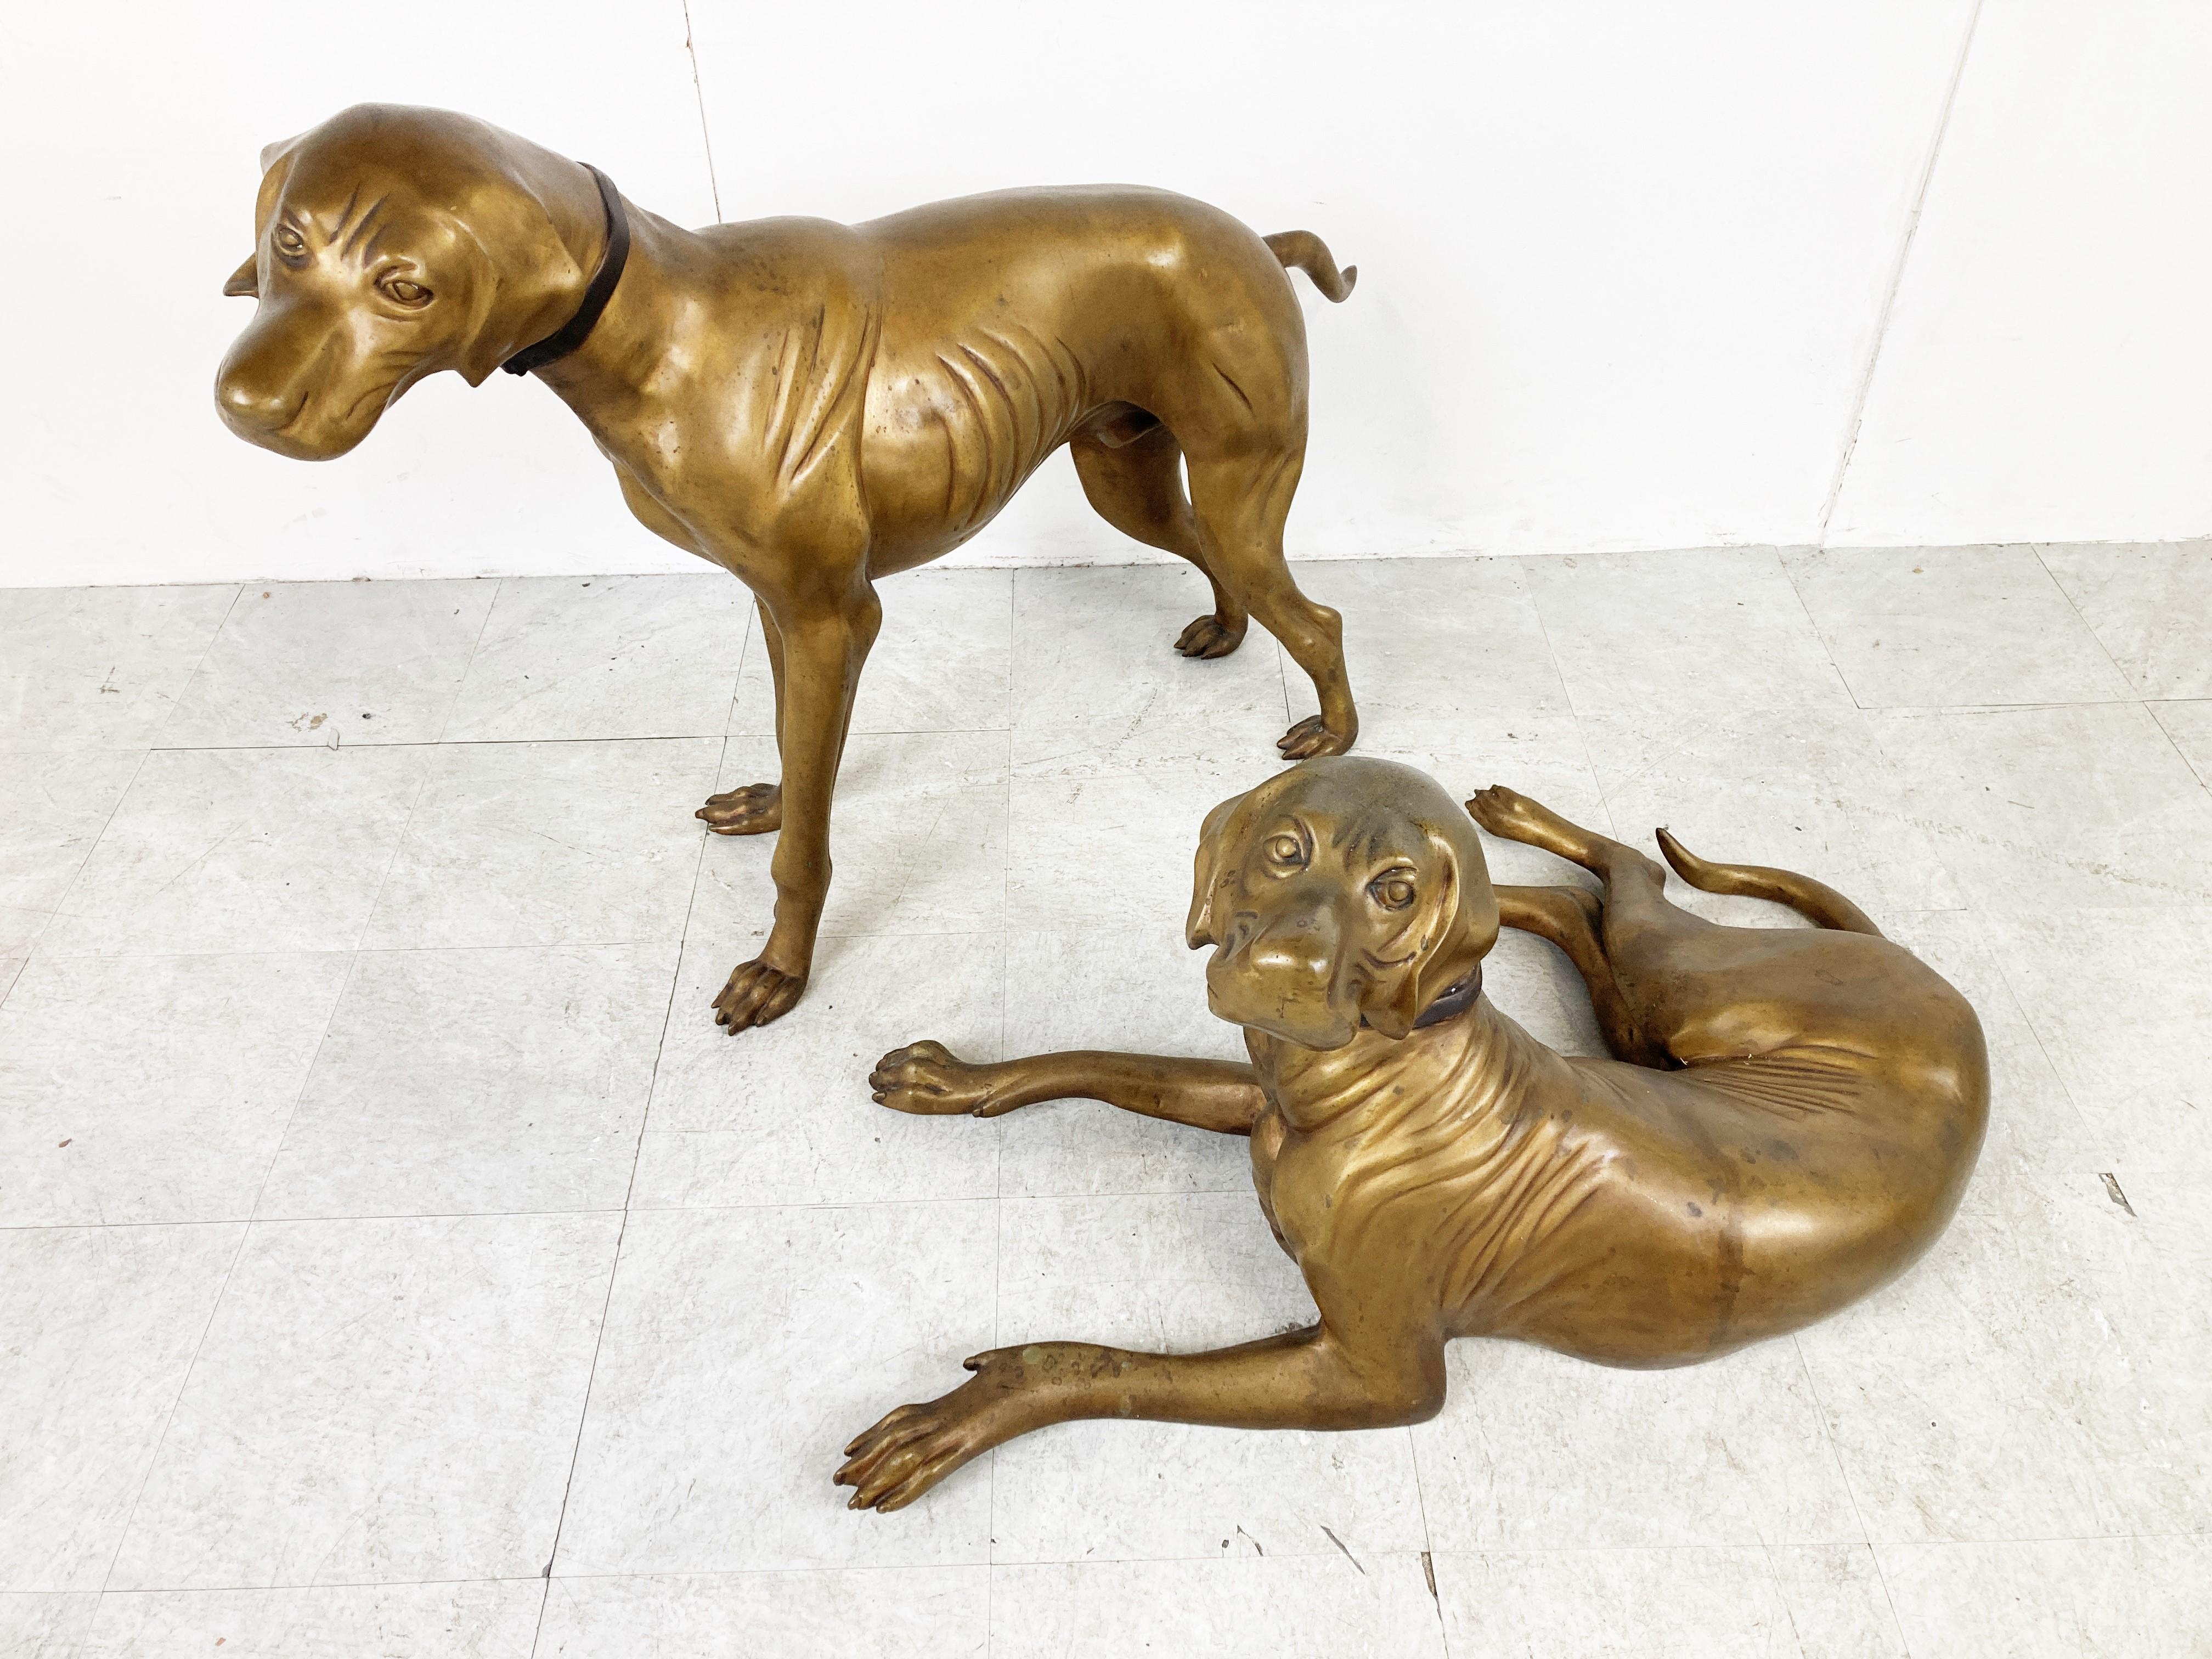 Impressive pair of life size brass 'weimaraner' dog sculptures.

One is laying down and the other on is standing, which make them extra decorative as a pair.

Nicely patinated brass and beautifully detailed sculptures

1960s -